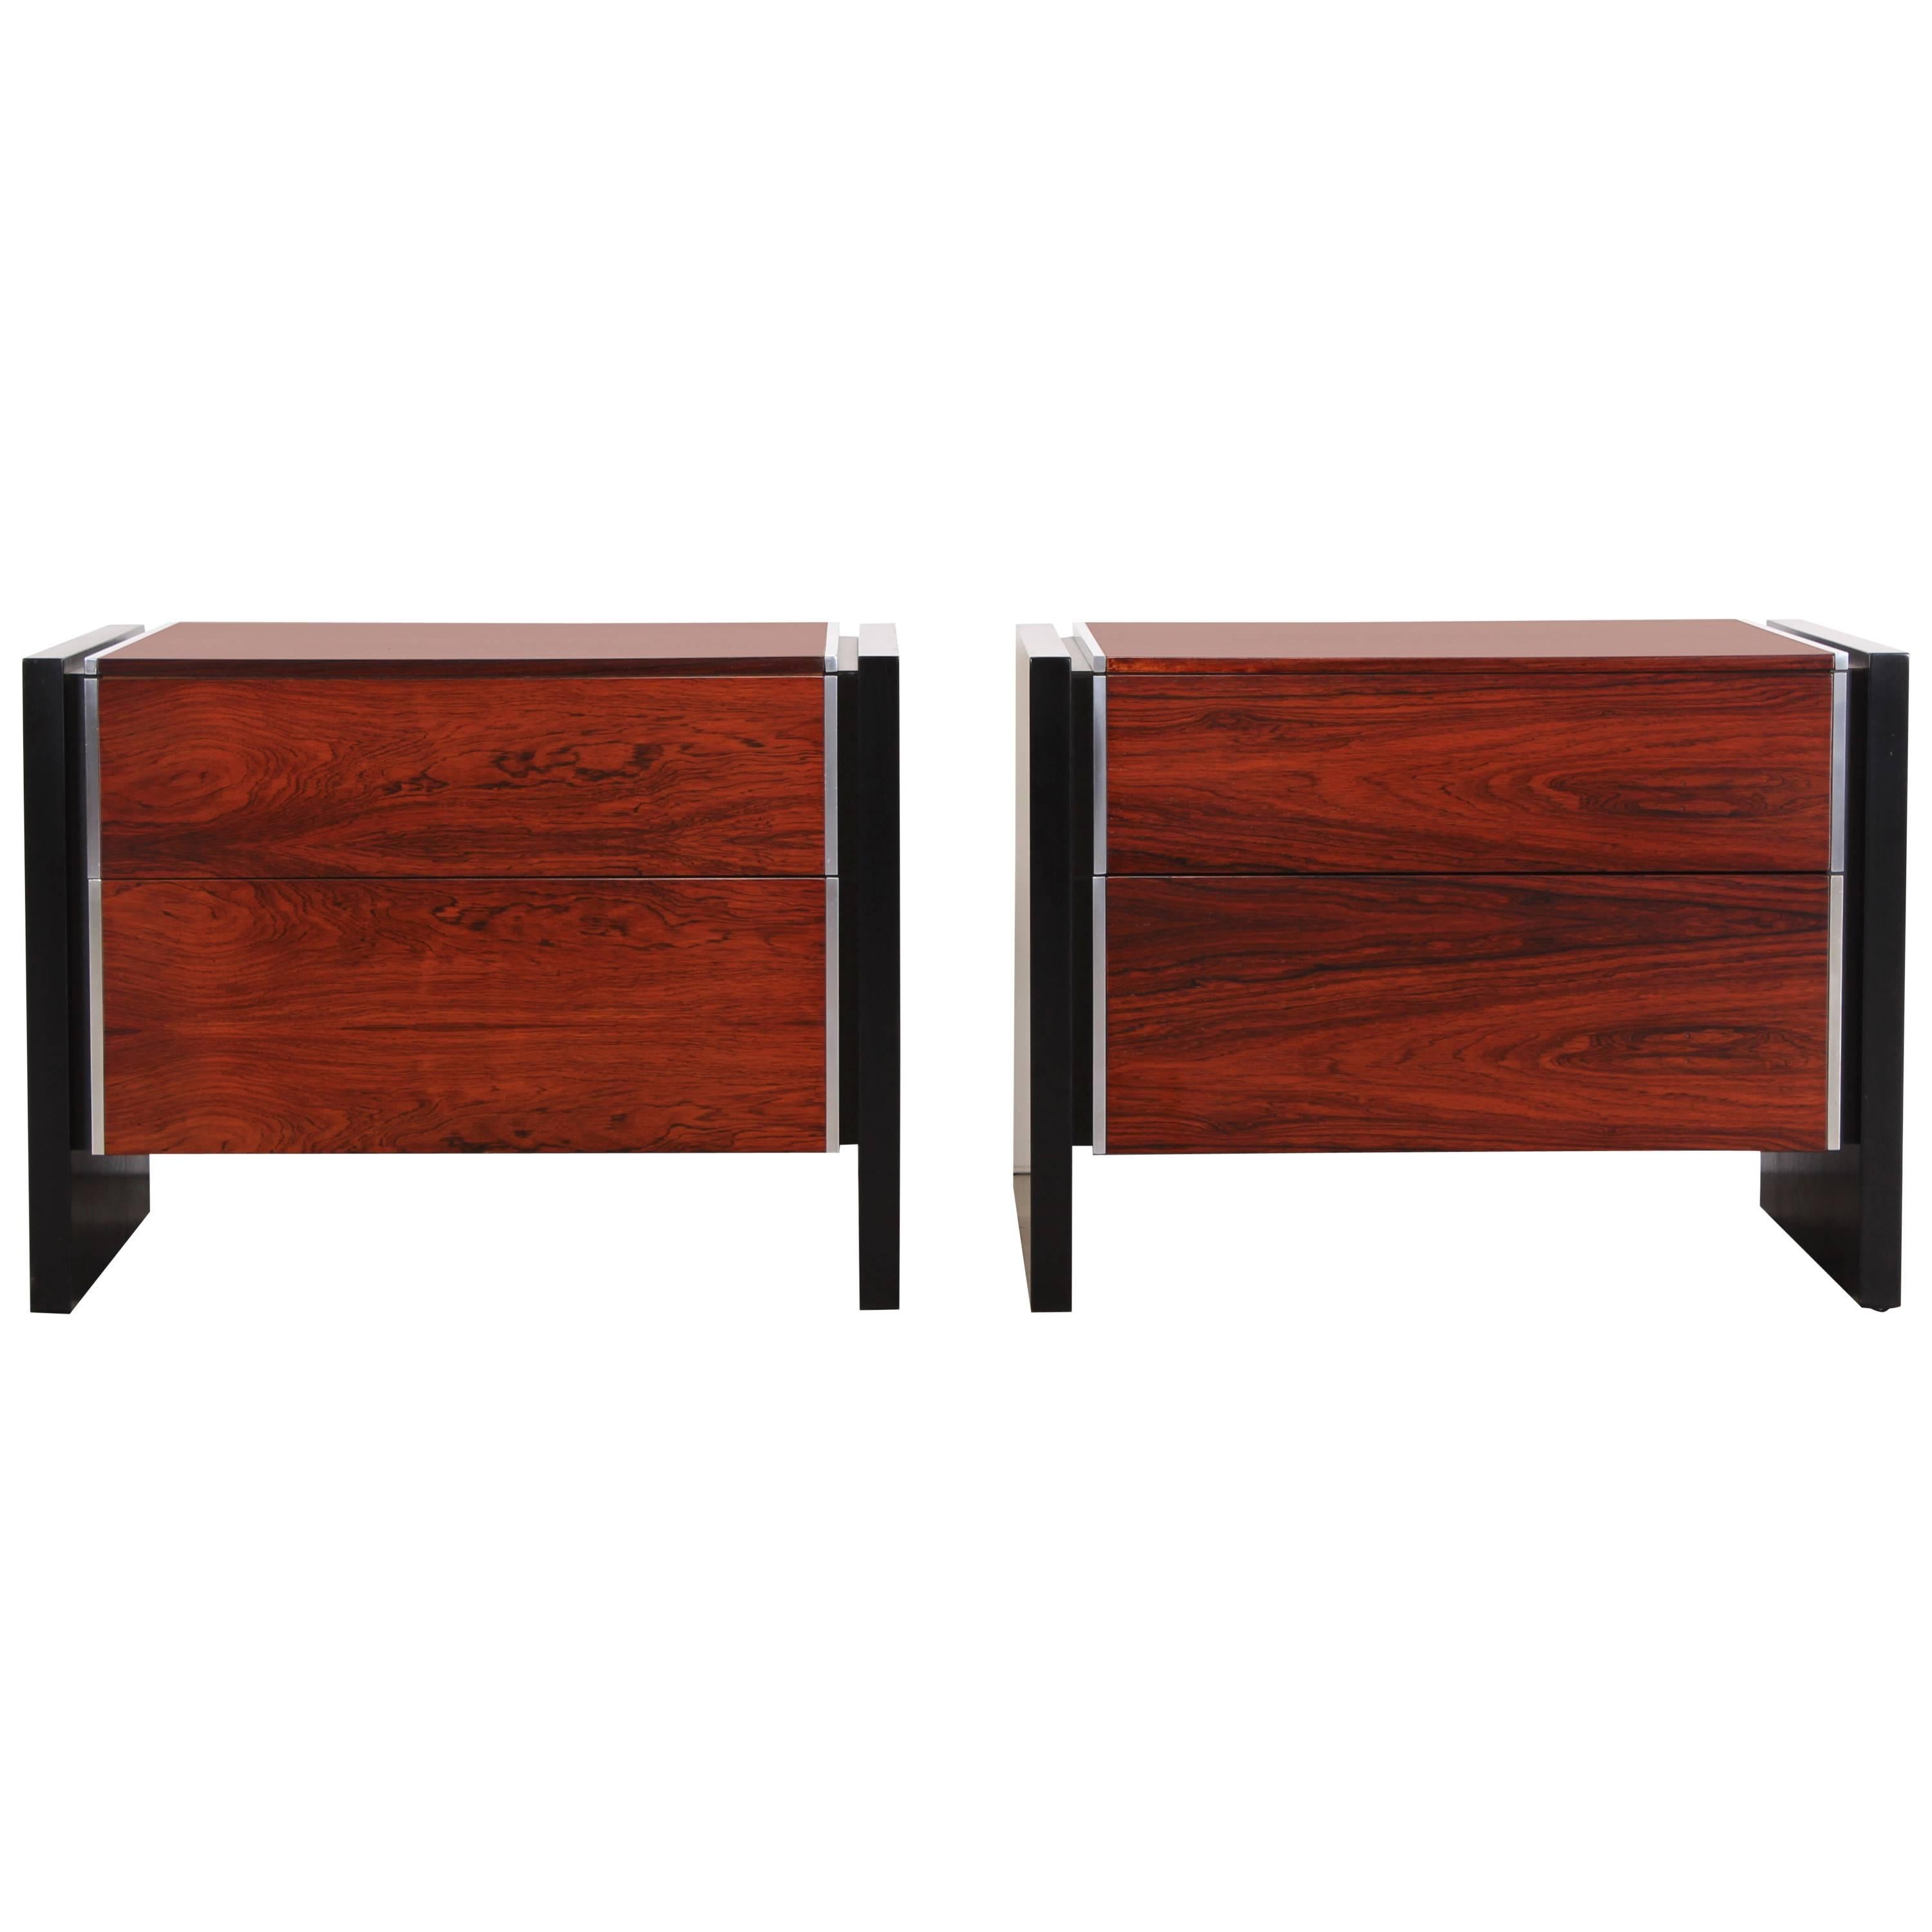 An exquisite Robert Baron for Glenn of California rosewood four piece bedroom set, 1970. Black oak side panels alternating with rosewood tops and drawer fronts, with aluminum accent pieces and hidden drawer pulls. Set includes a pair of night